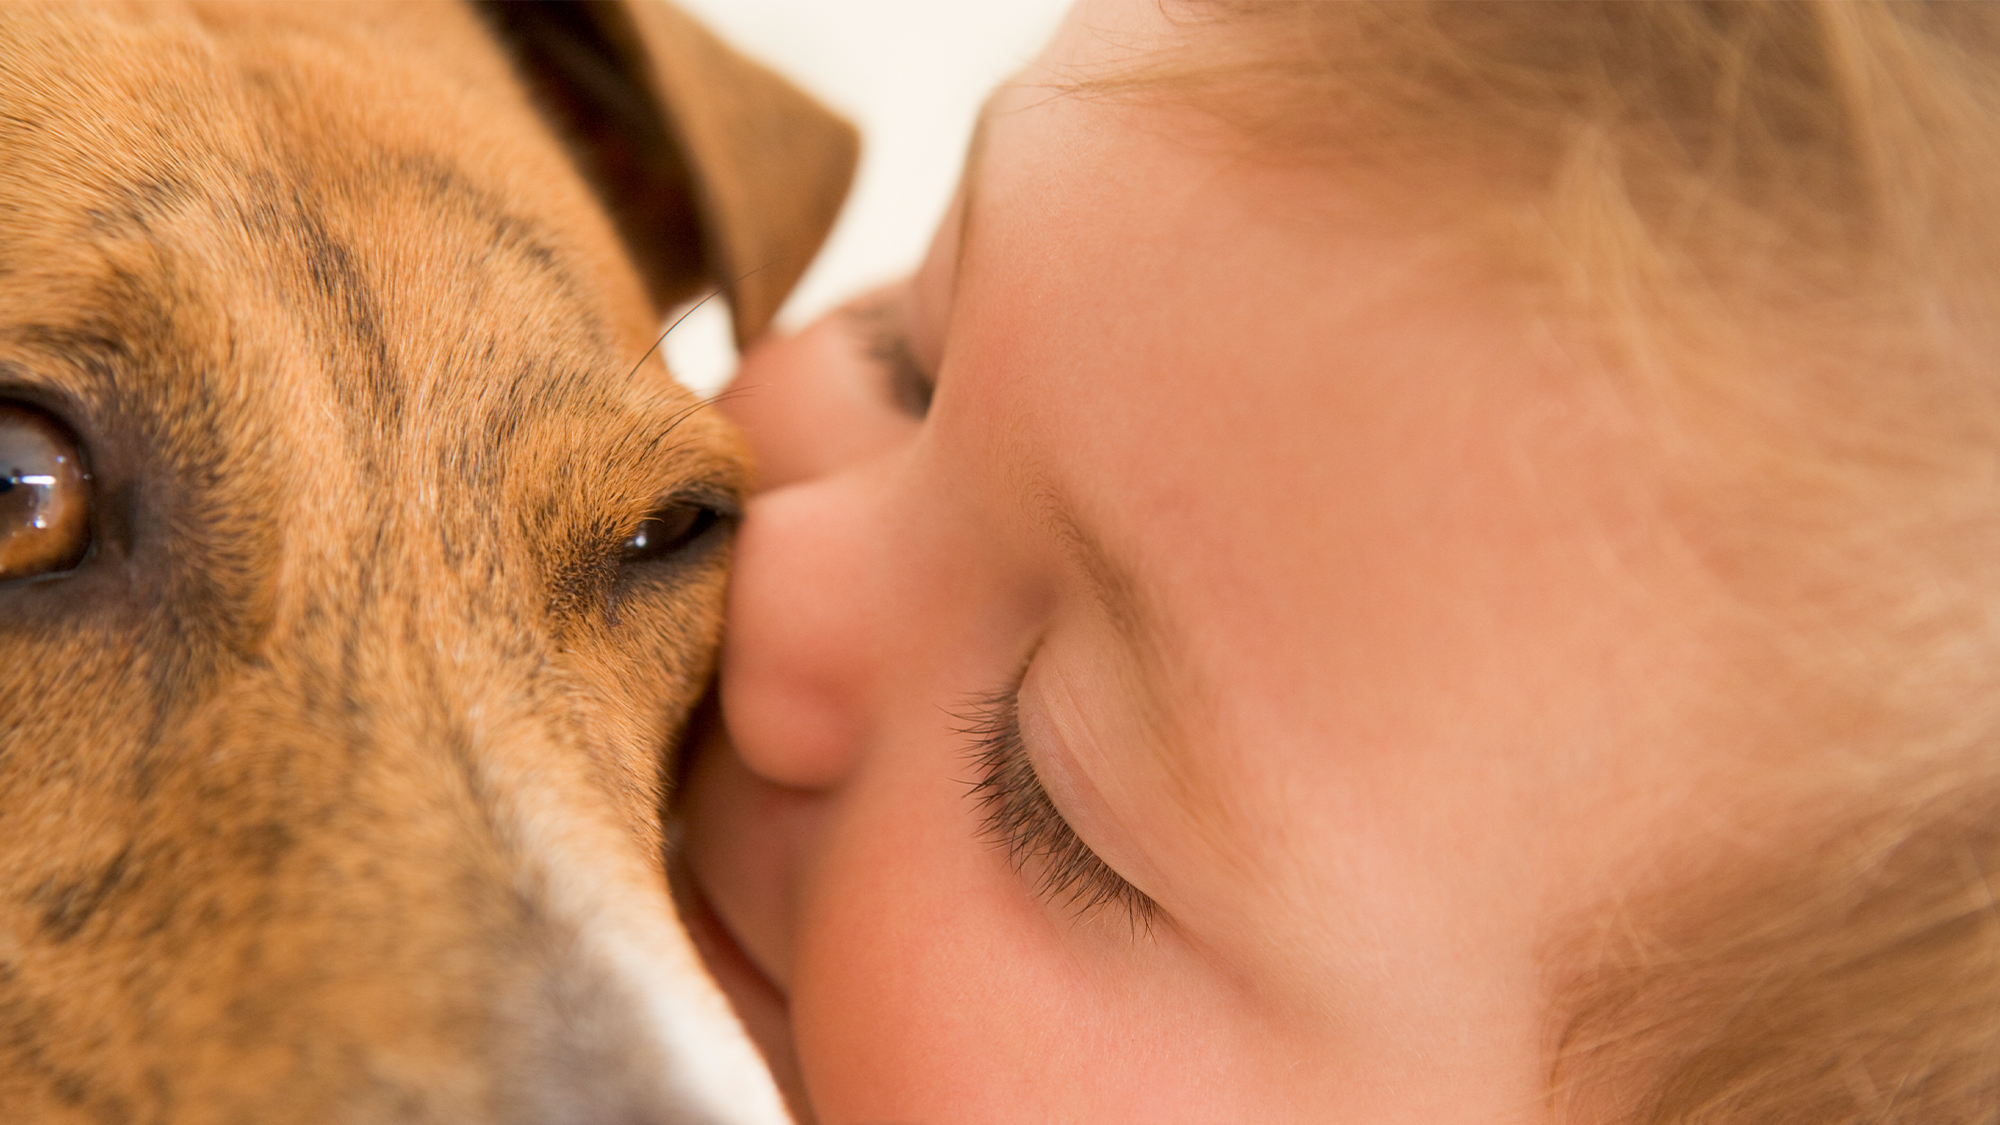 A baby kisses a small dog